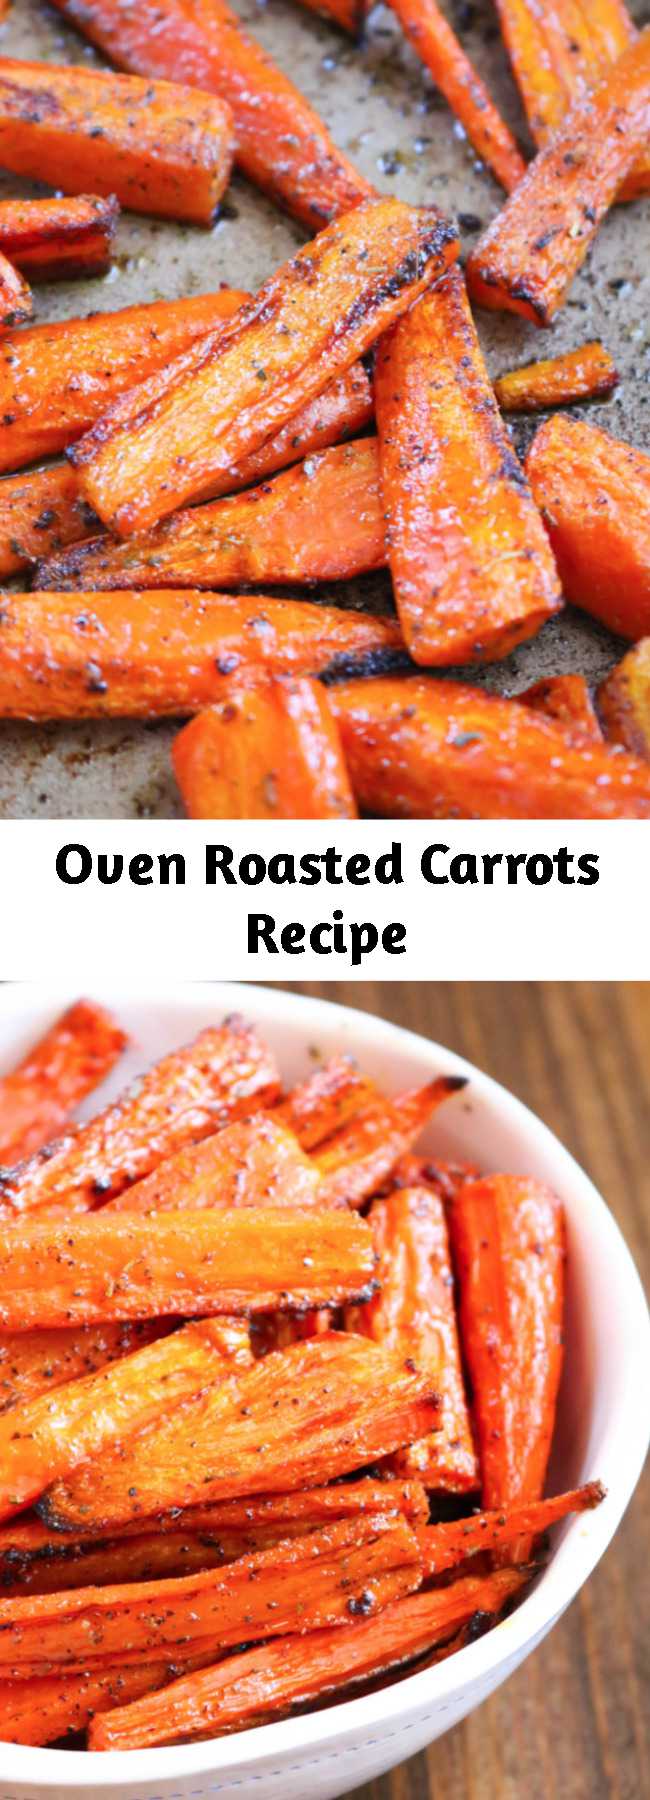 Oven Roasted Carrots Recipe - Oven Roasted Carrots make a great side dish that pairs perfect with almost any main course! These cooked carrots are oven roasted with a few seasonings and can be customized to use your favorites from the spice drawer! Ready in under 45 minutes and perfect for weeknights, weekends and meal prep!